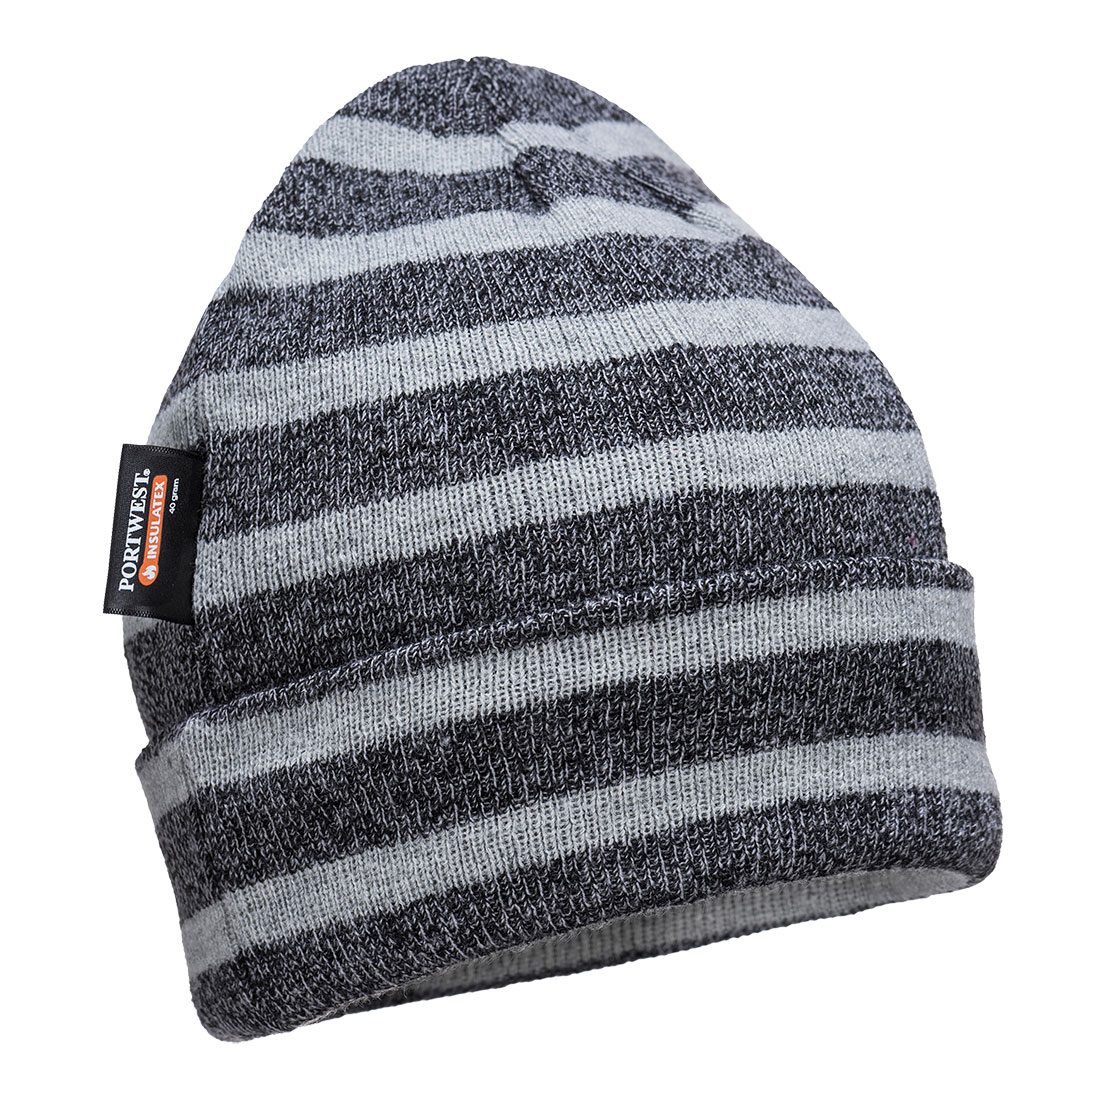 Striped Insulated Knit Cap, Insulatex Lined Size  Grey